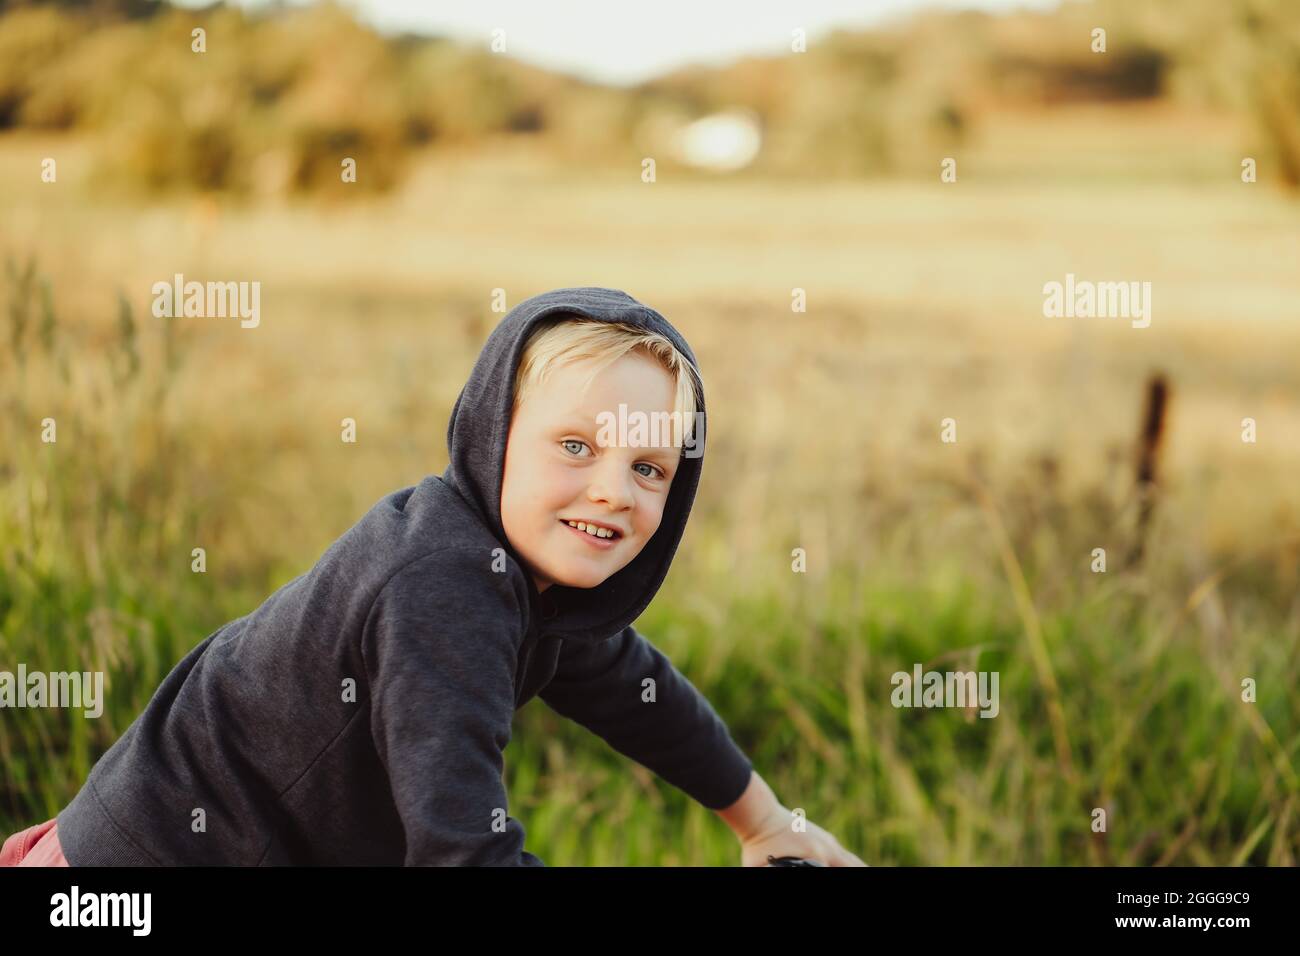 Young blonde boy wearing hoodie riding bike on dry country lane Stock Photo